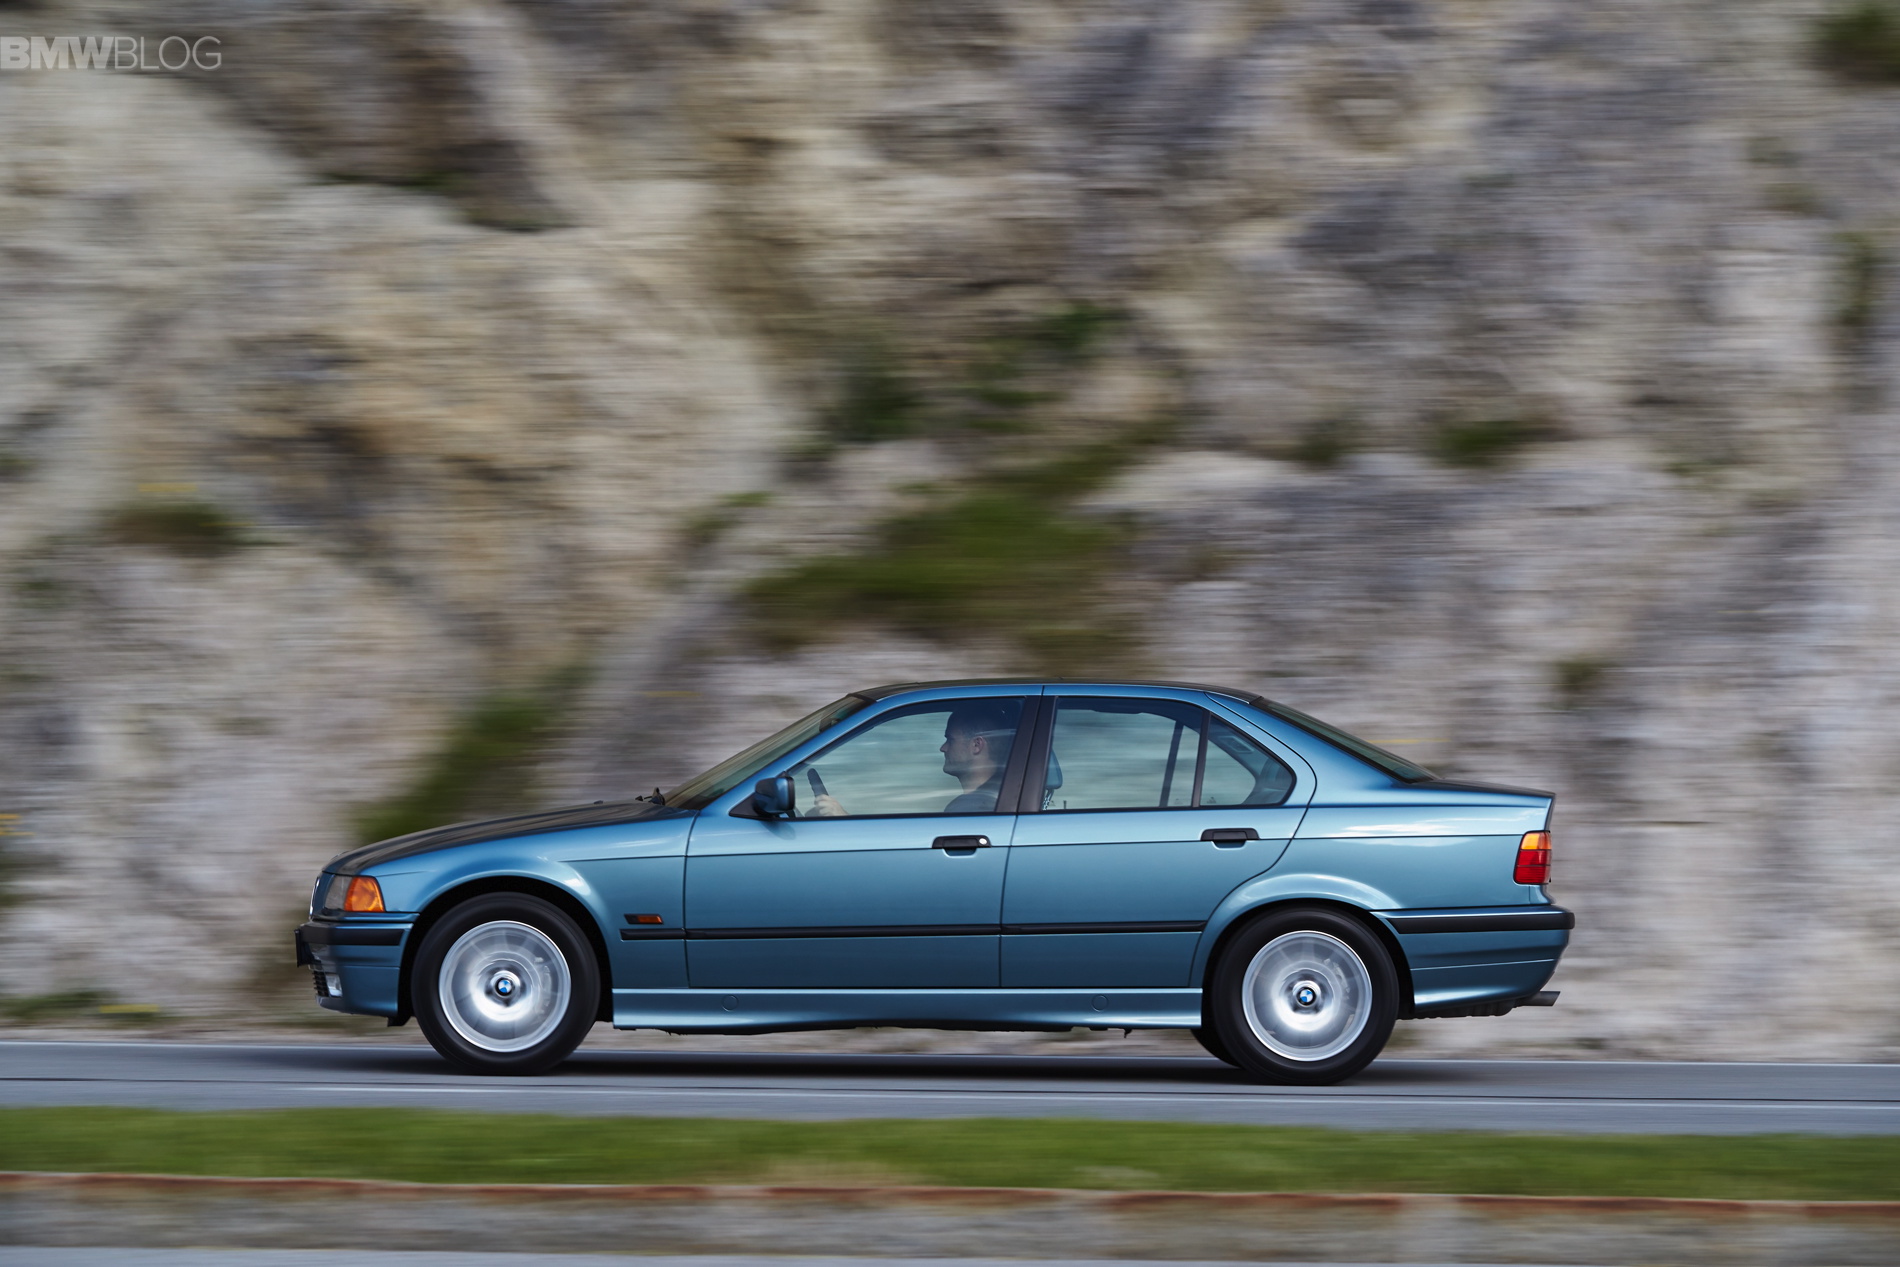 BMW E36 3 Series Buyers Guide - What Model To Buy